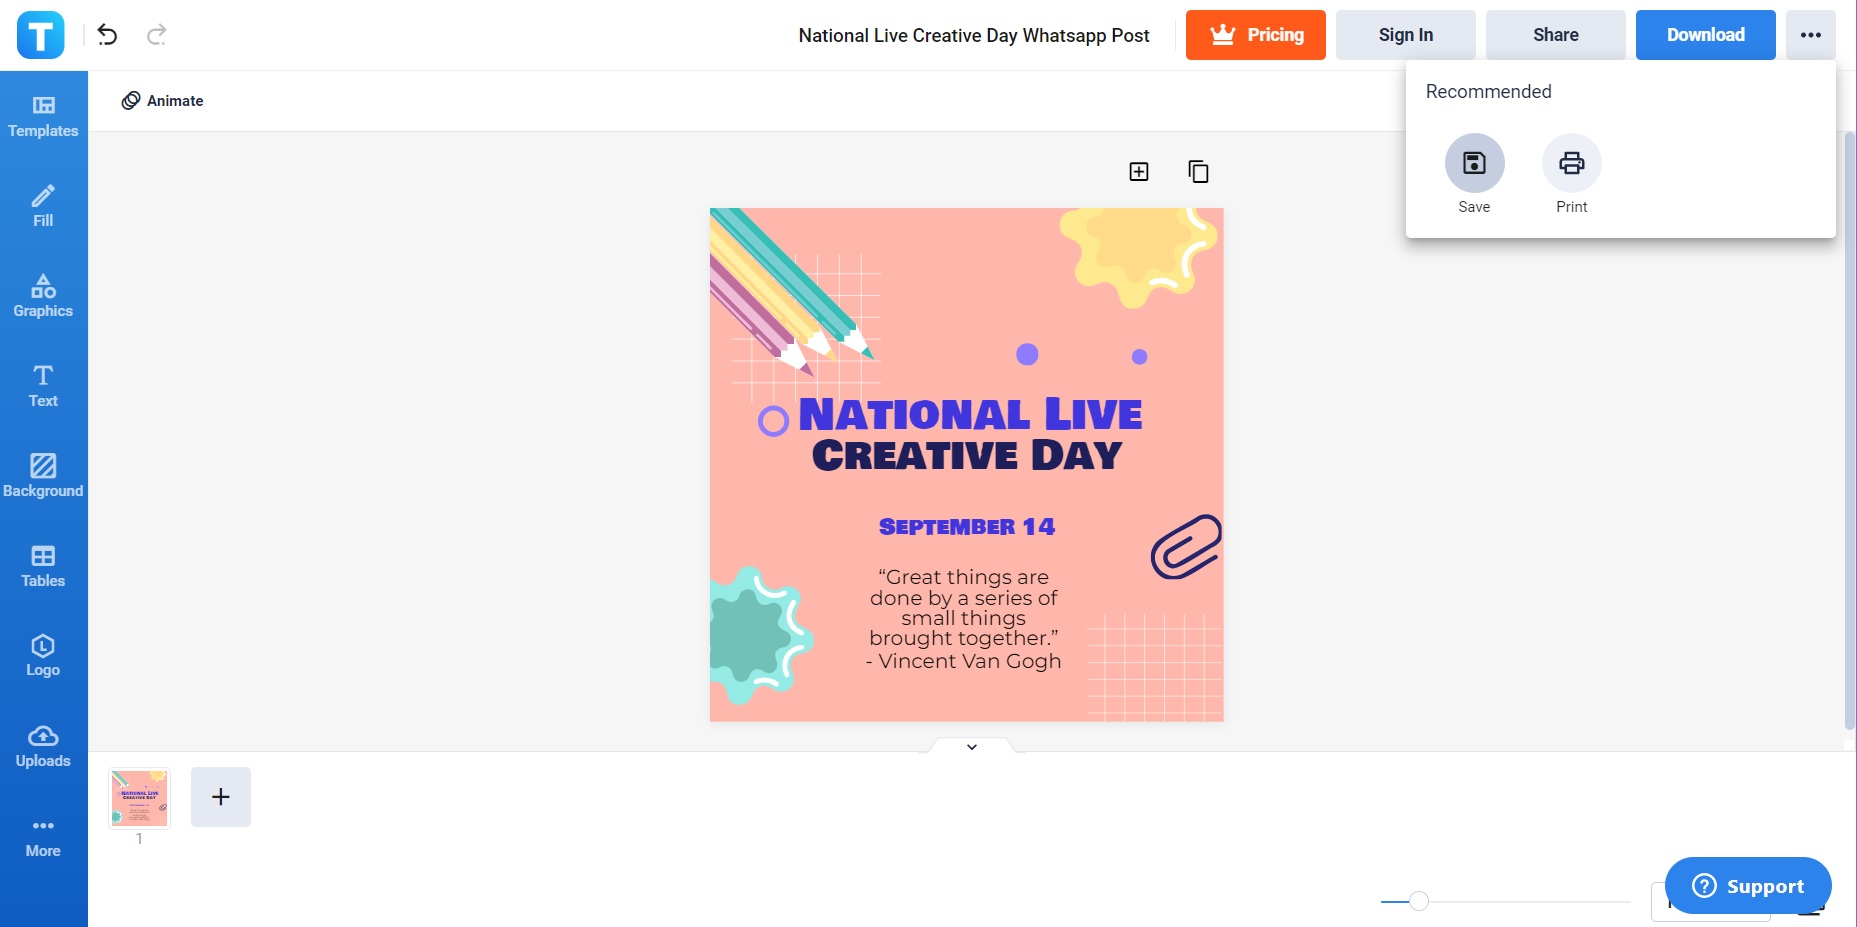 revise download and upload your new whatsapp post for national live creative day